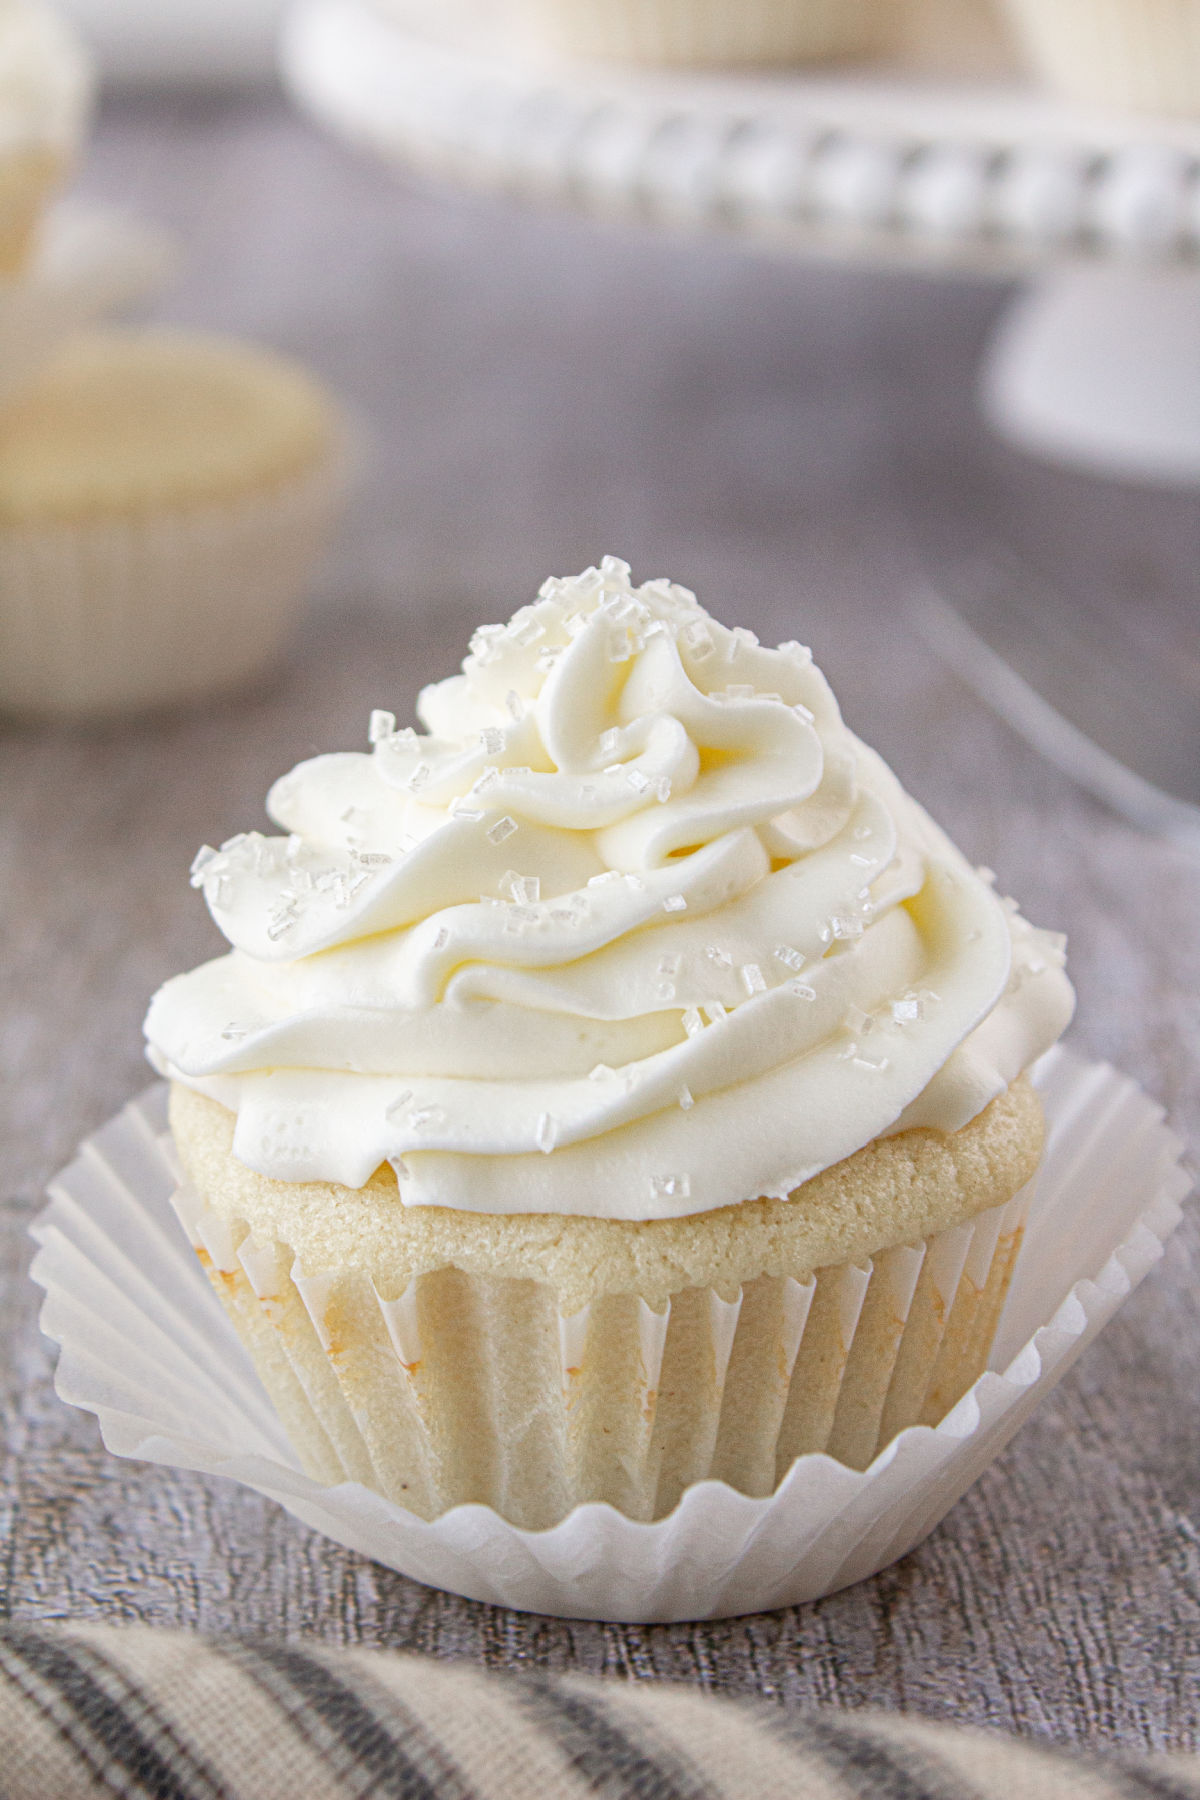 A single white cupcake with creamy white frosting on a table.